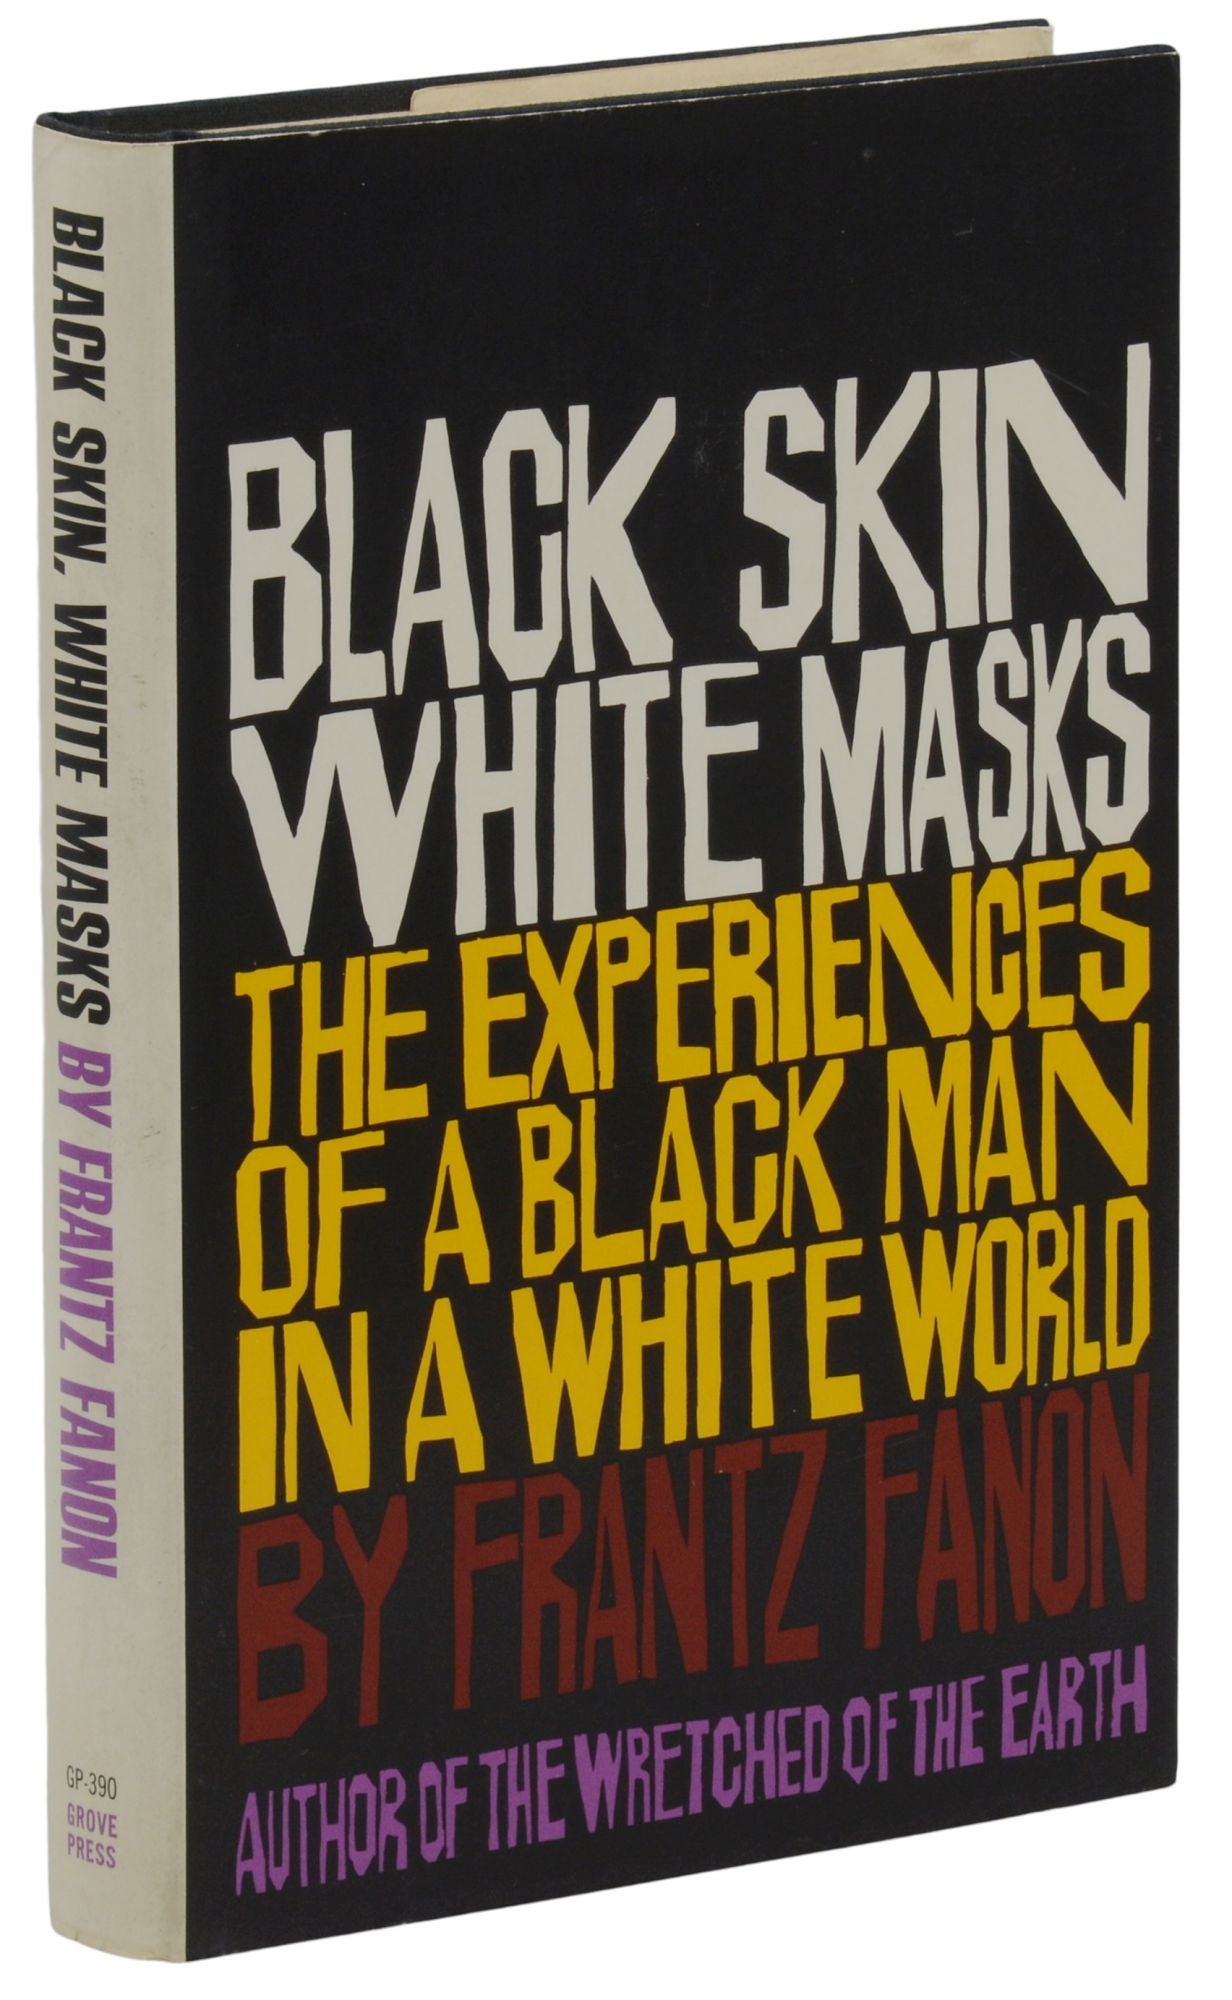 Peau Noire, Masques Blancs(Black Skin, White Masks) by Frantz Fanon -  Paperback - Signed First Edition - 1952 - from Anniroc Rare Books (SKU: 184)